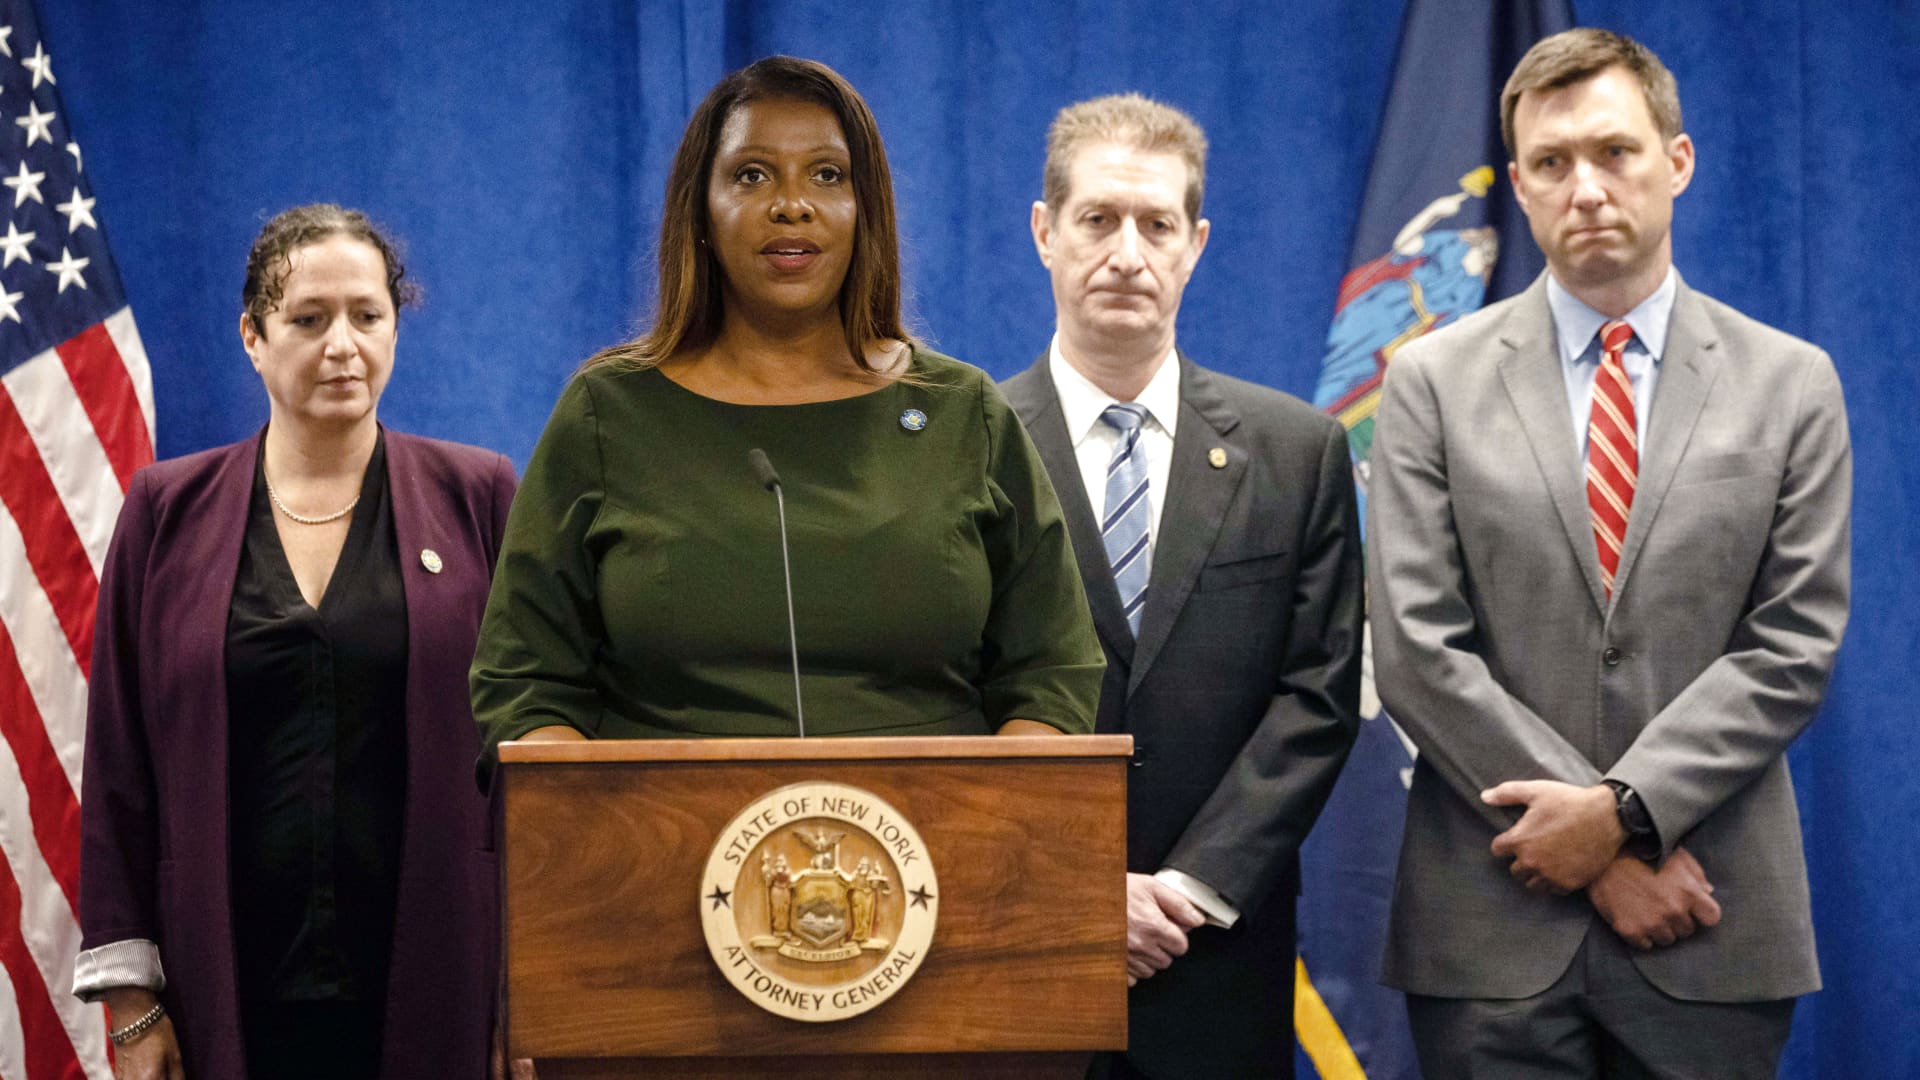 New York Attorney General Letitia James says Trump committed crimes, asks federa..